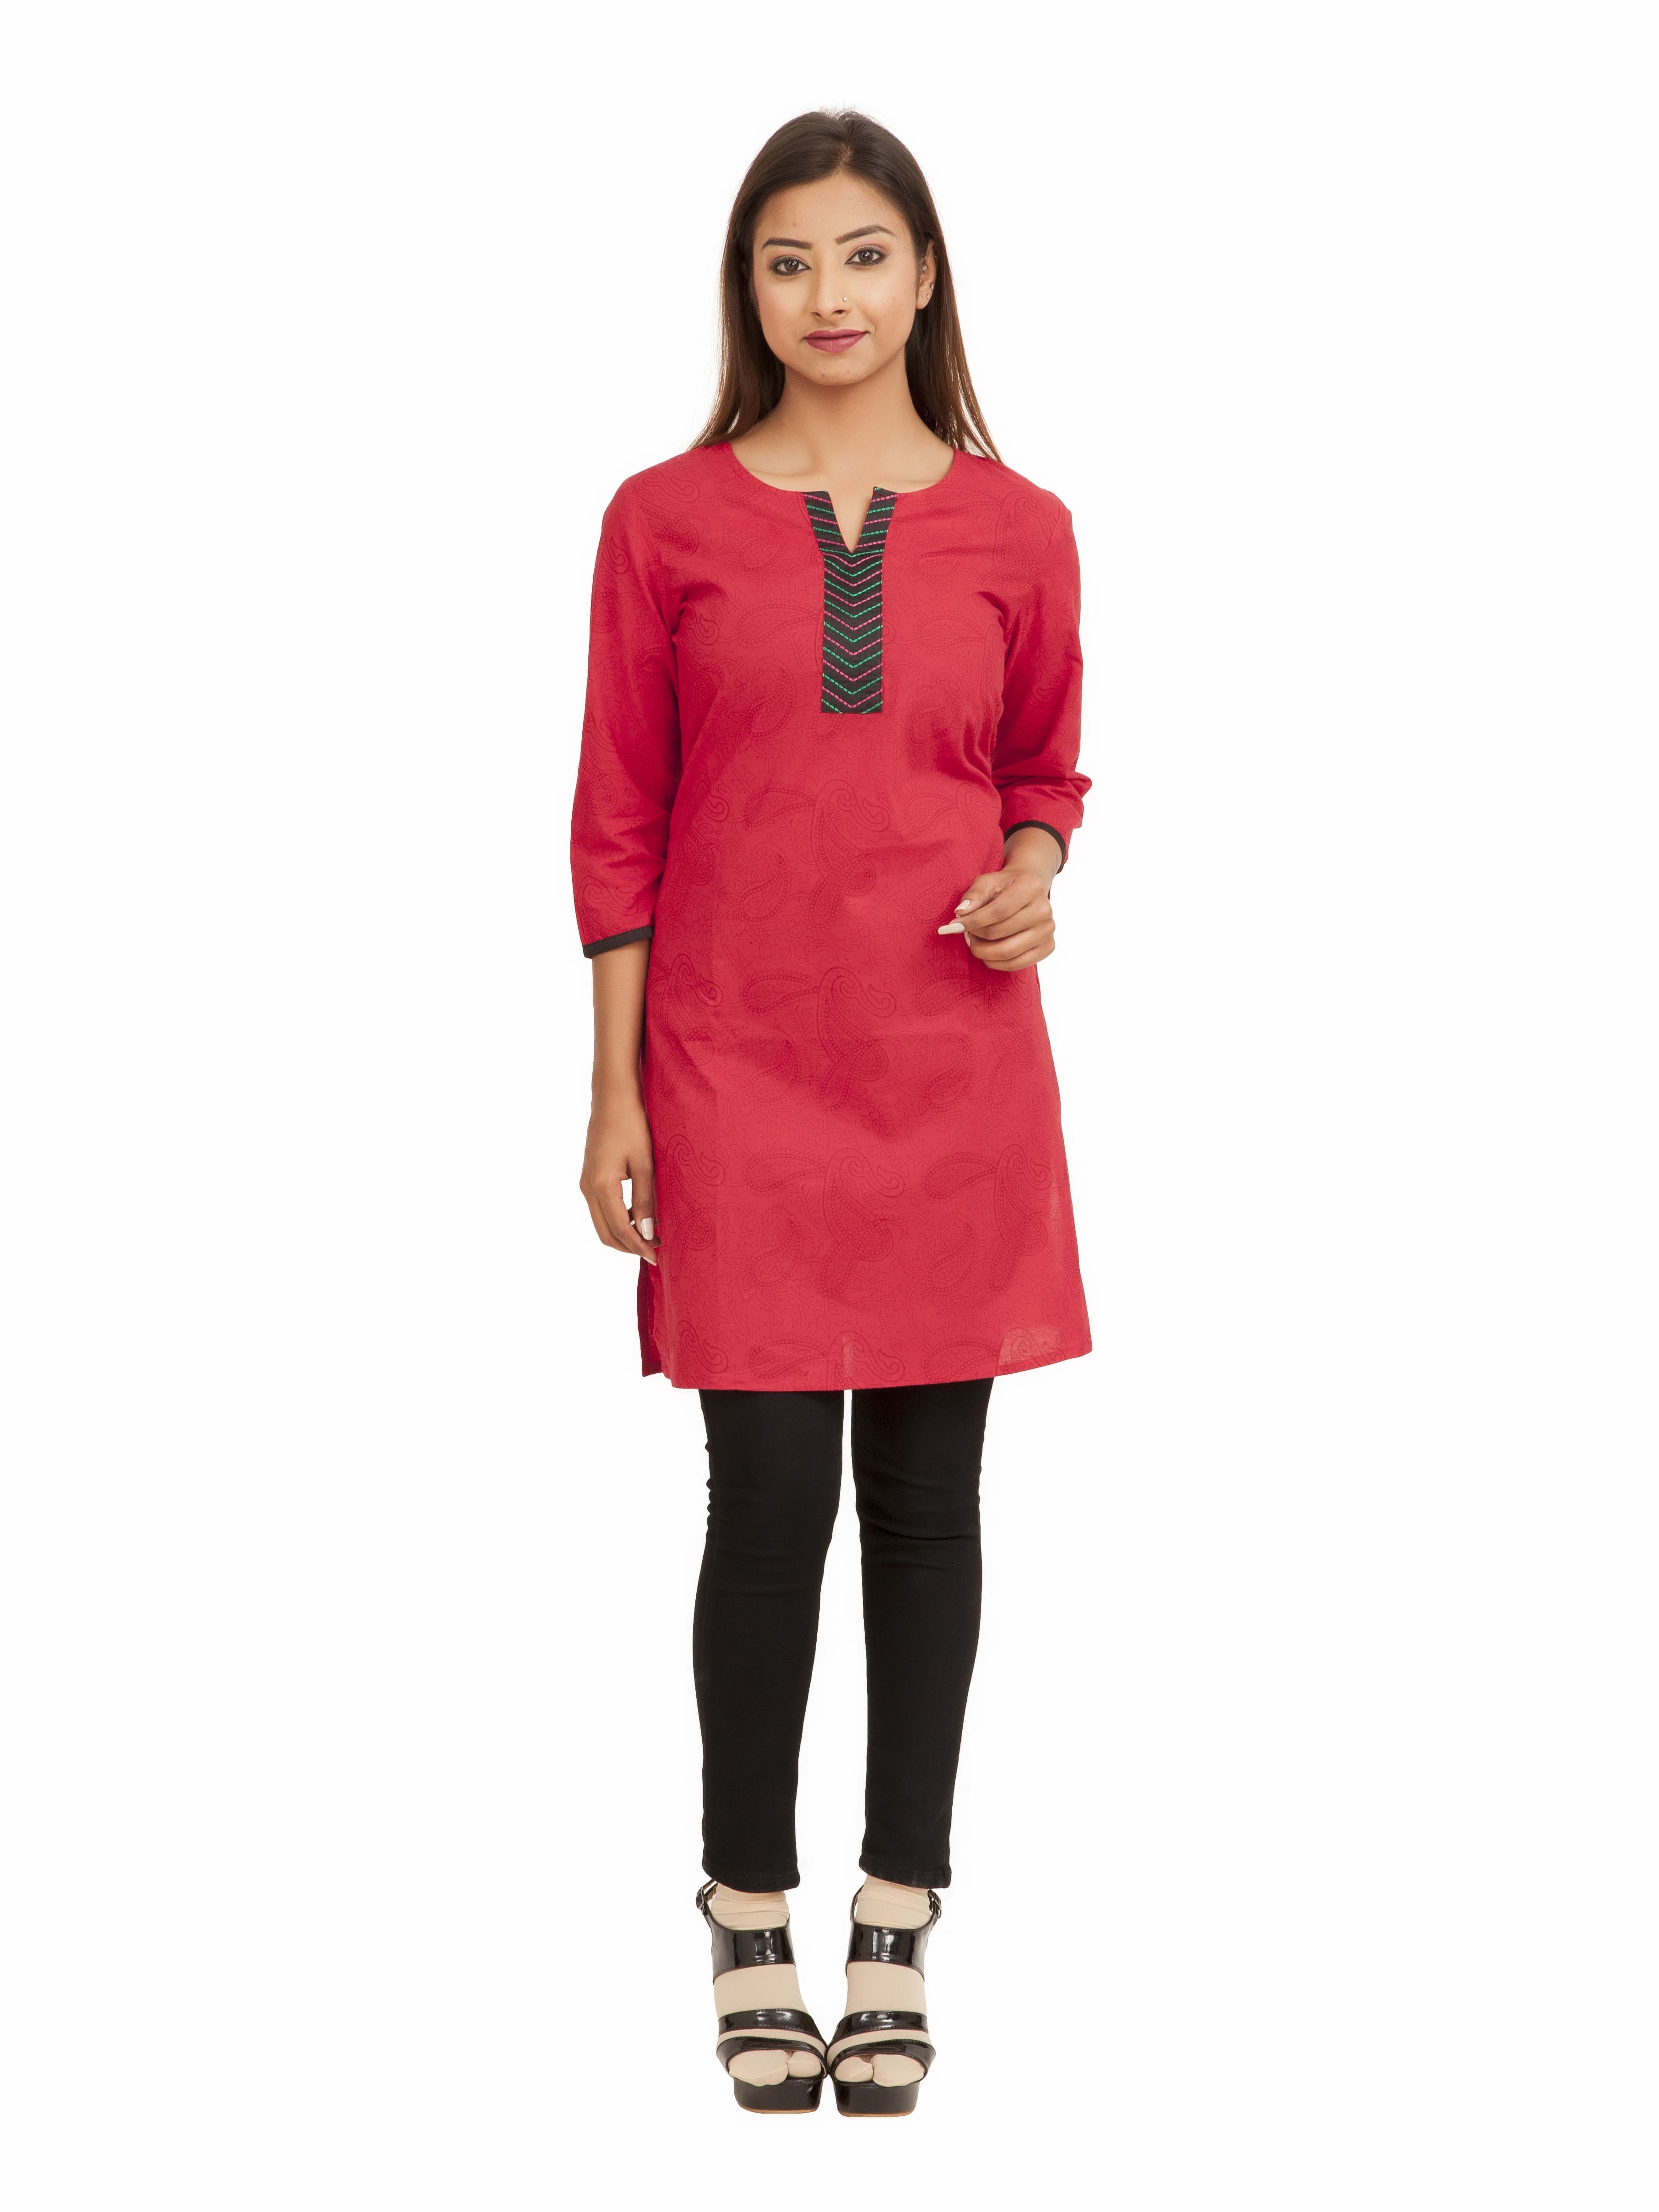 Wholesale Suppliers of Womens Clothing in India